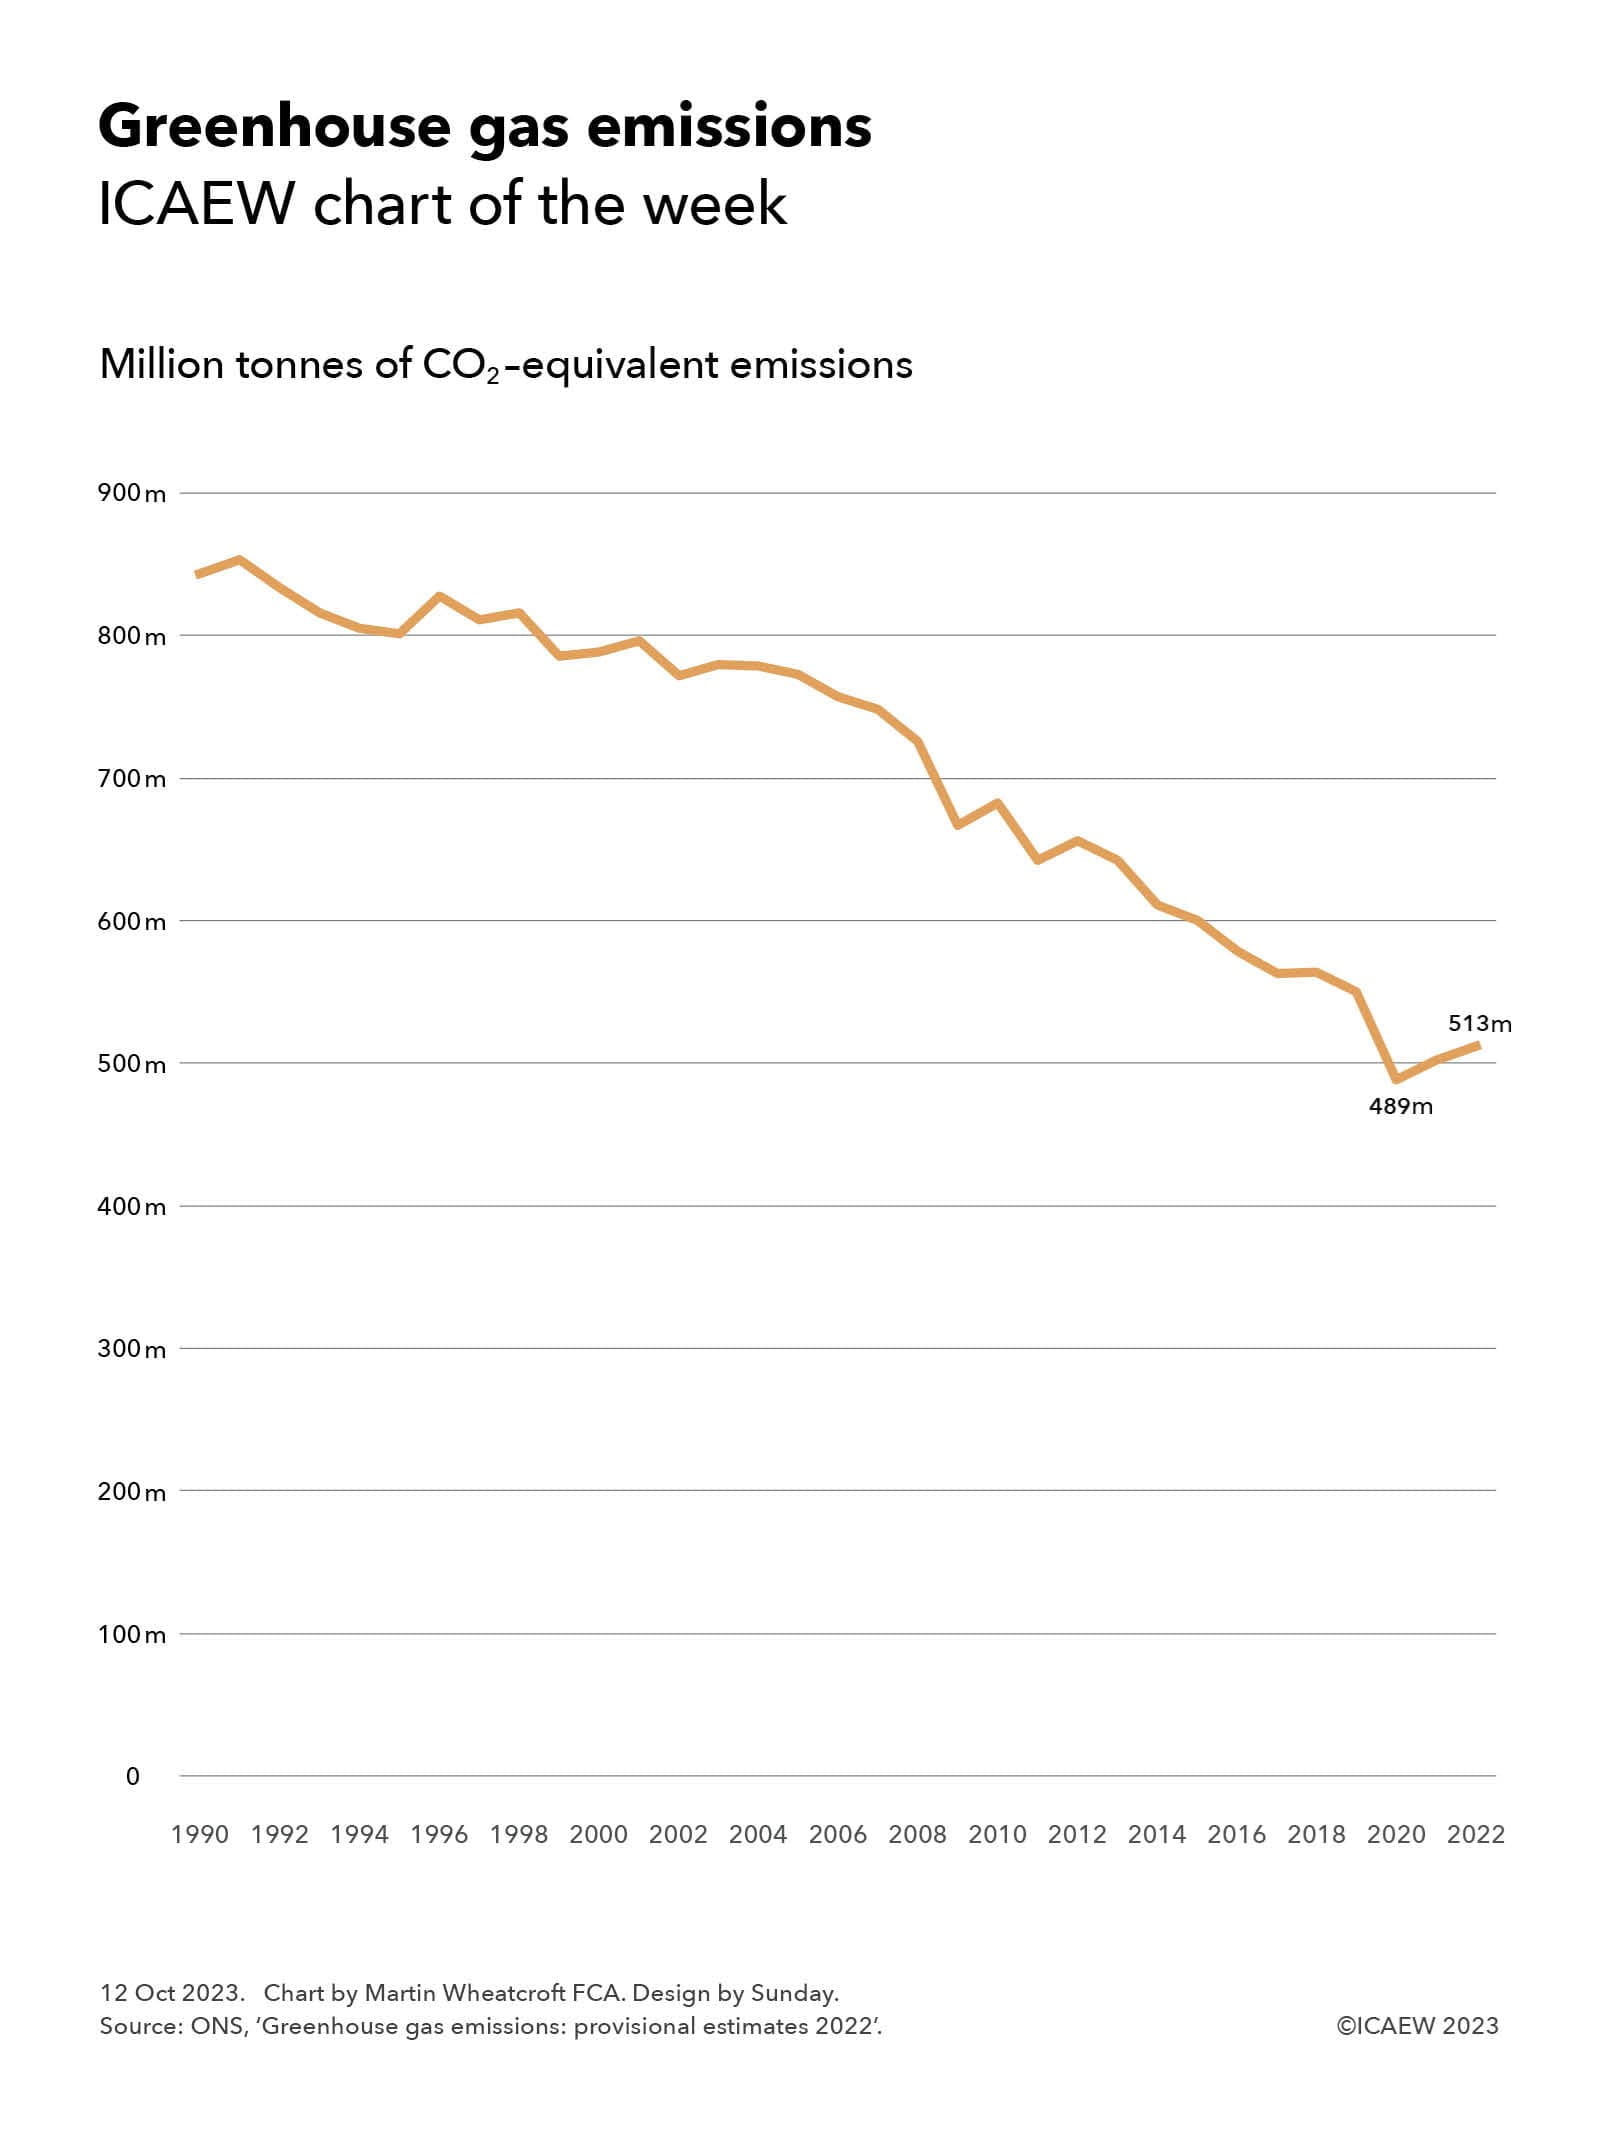 ANR Climate Action Office GHG emissions report shows pandemic decline